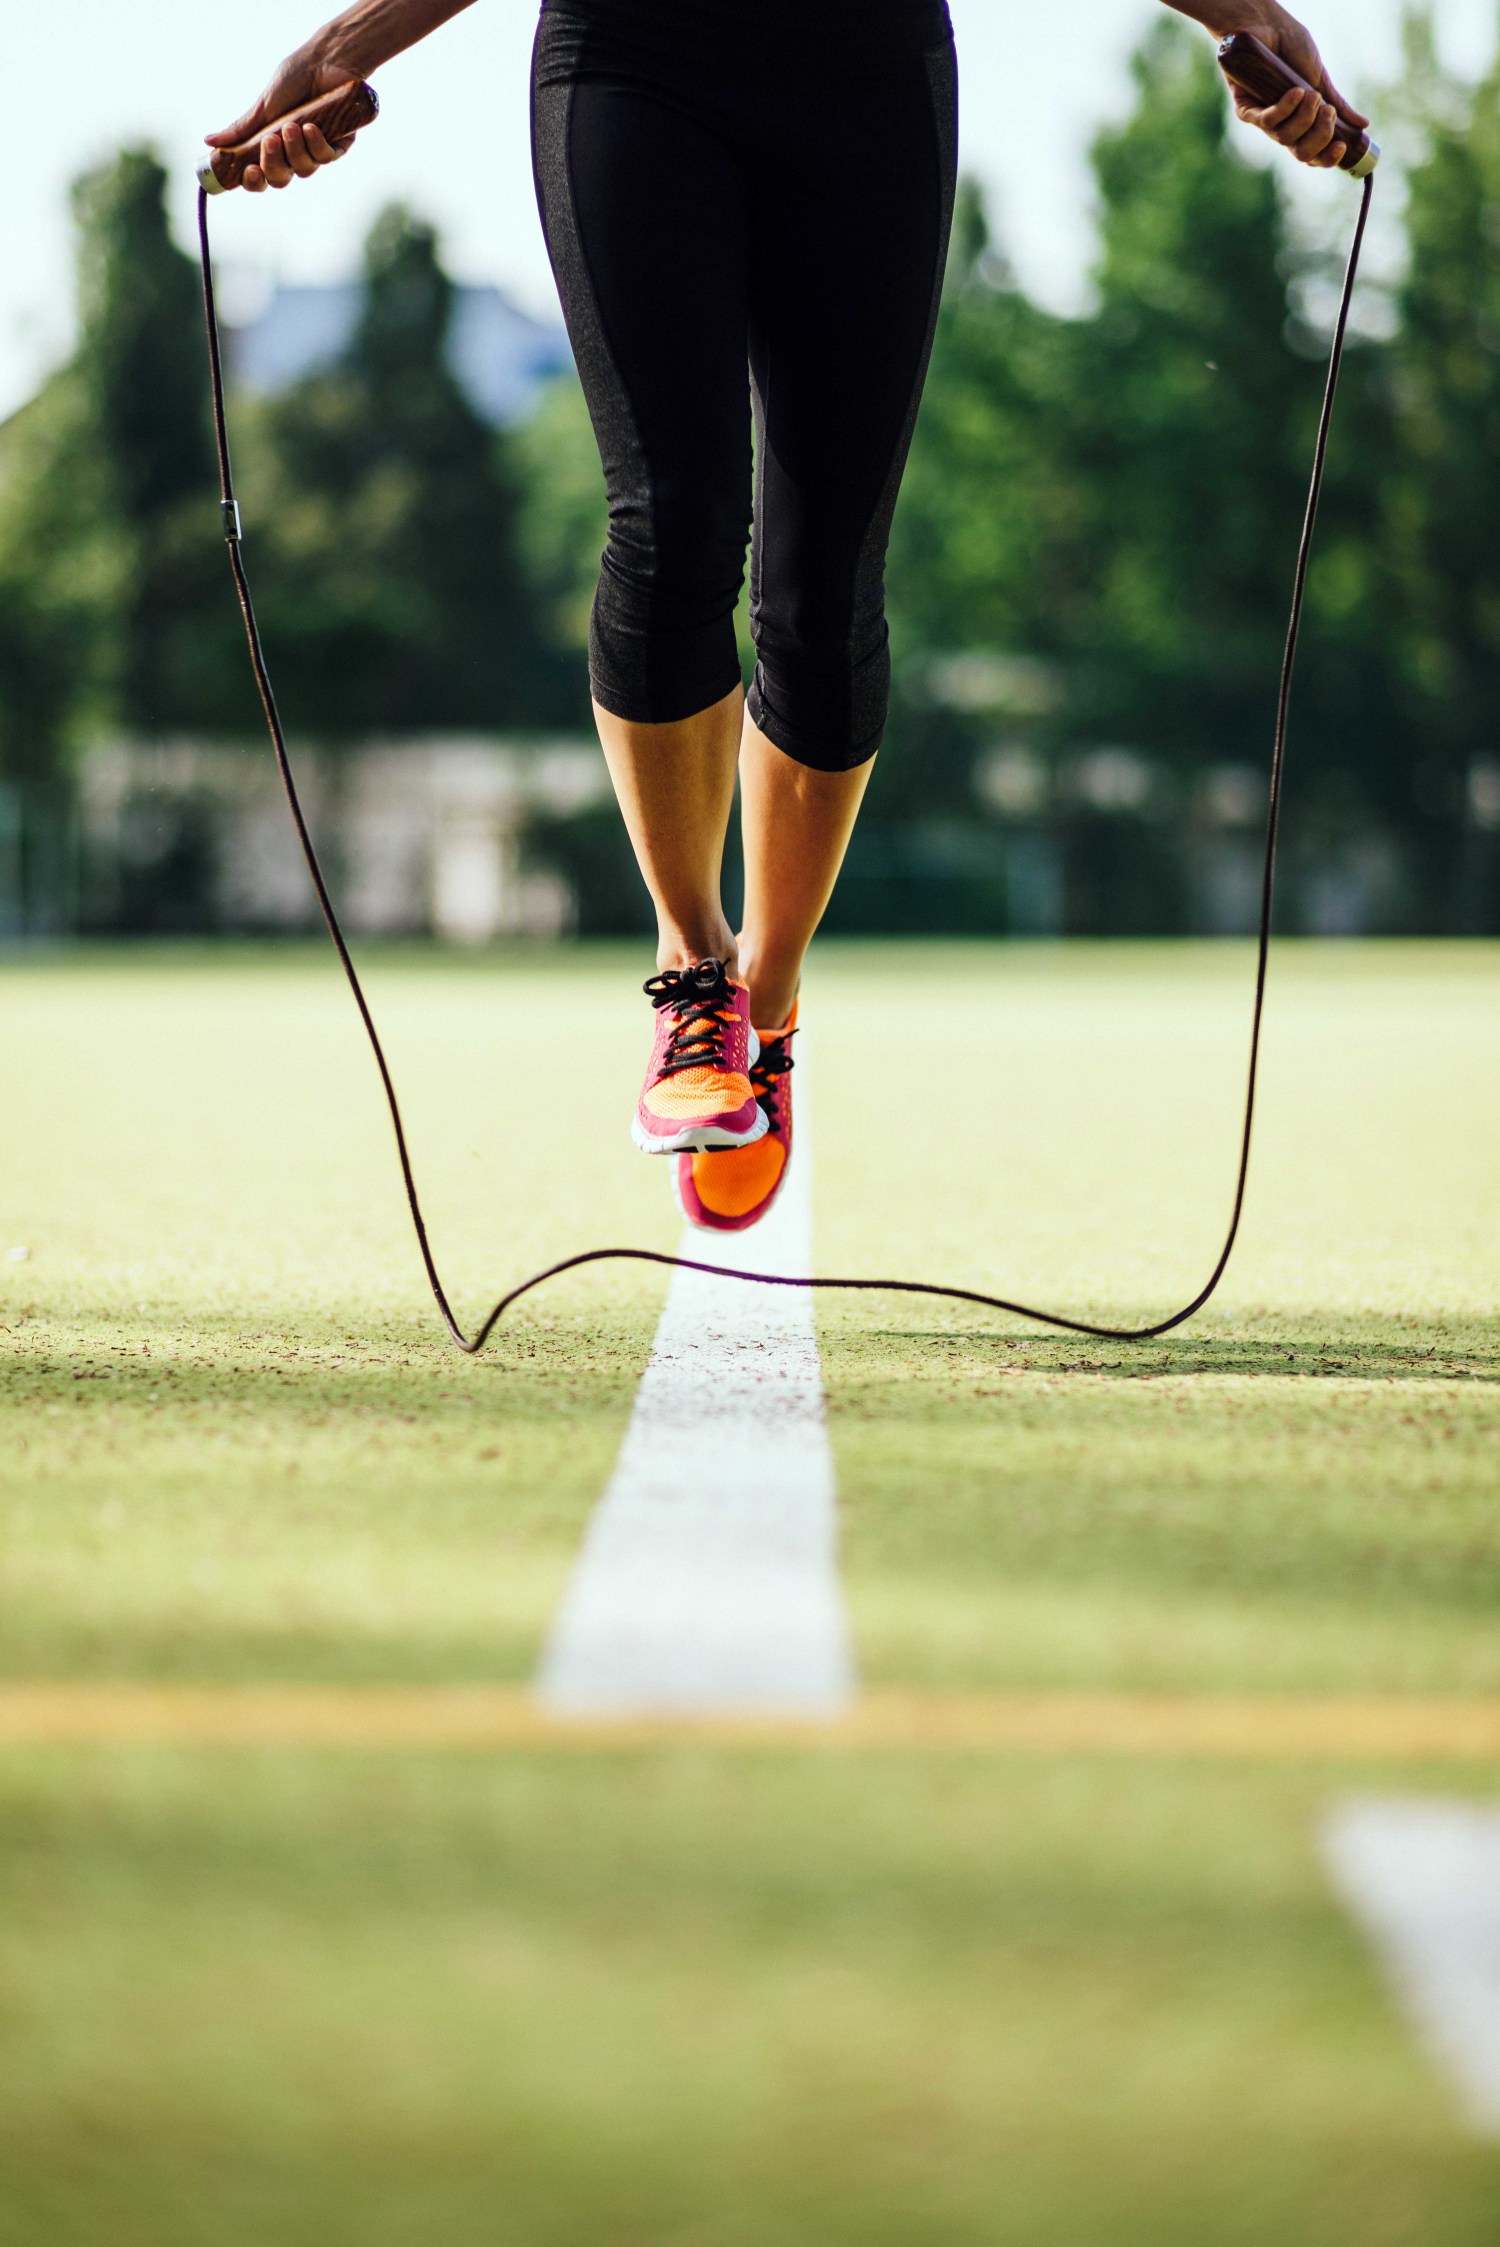 How is skipping rope one of the best workouts to lose weight?